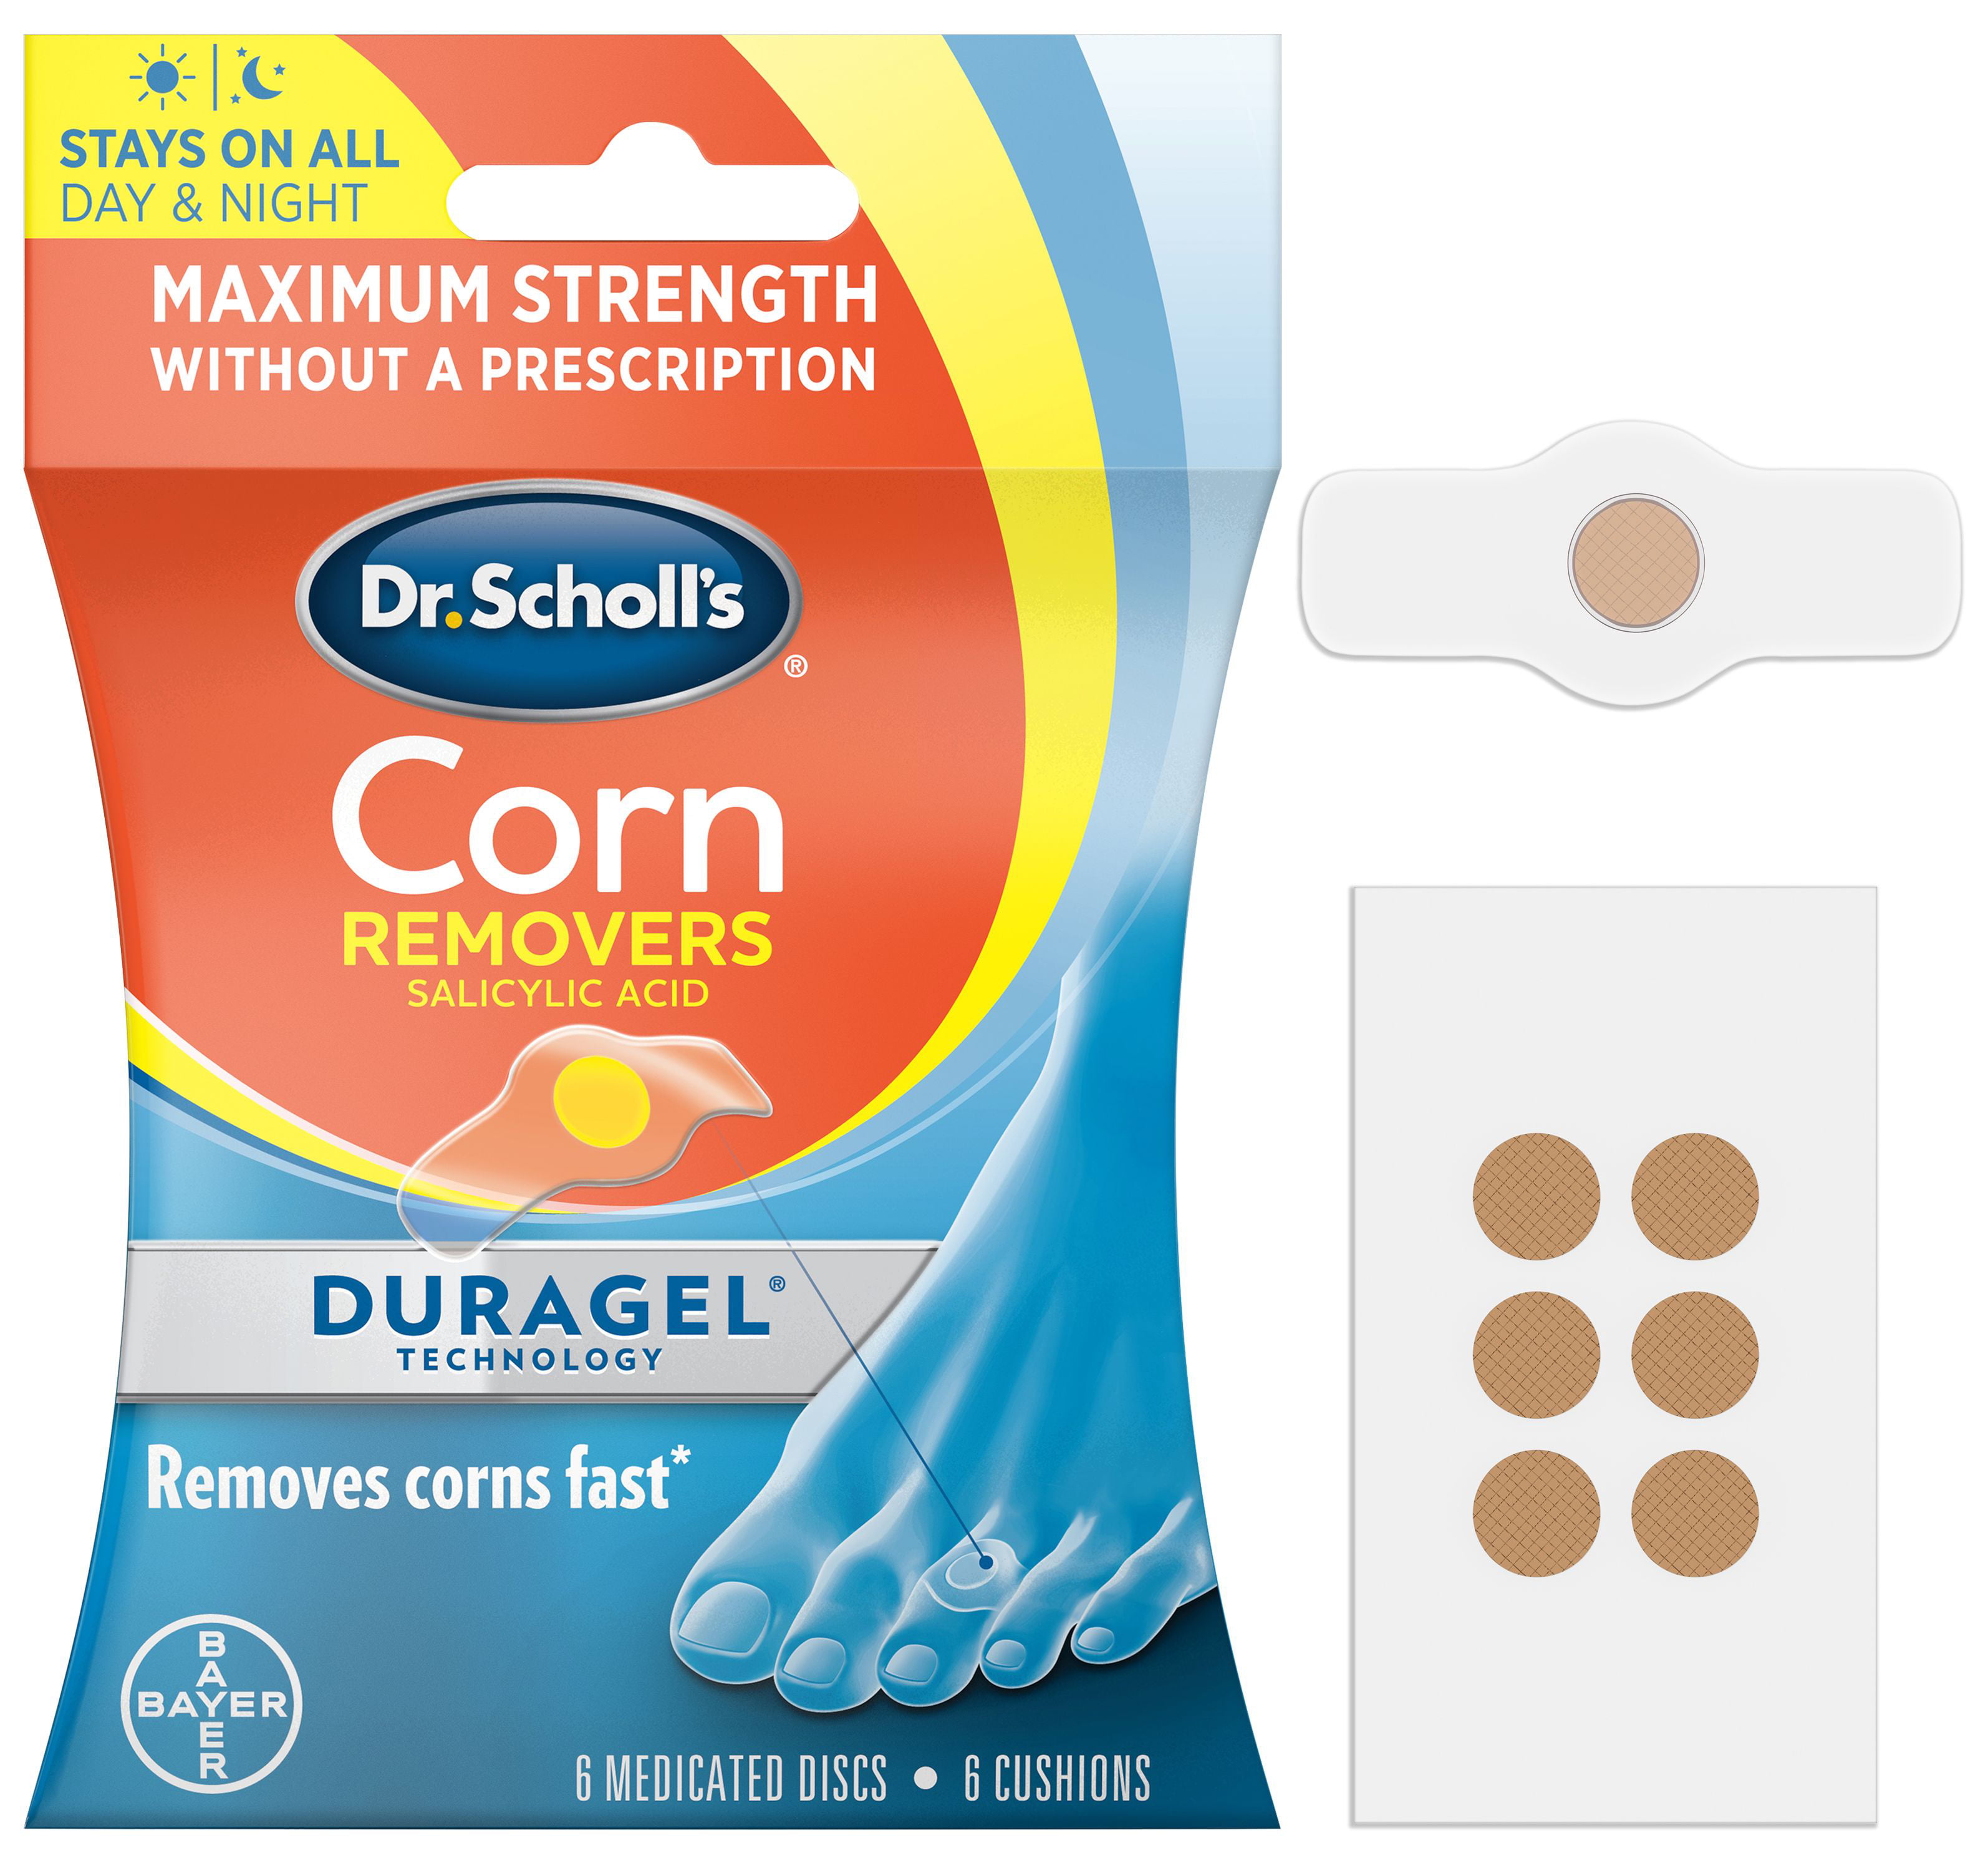 Dr. Scholl's CORN Removers with Duragel 